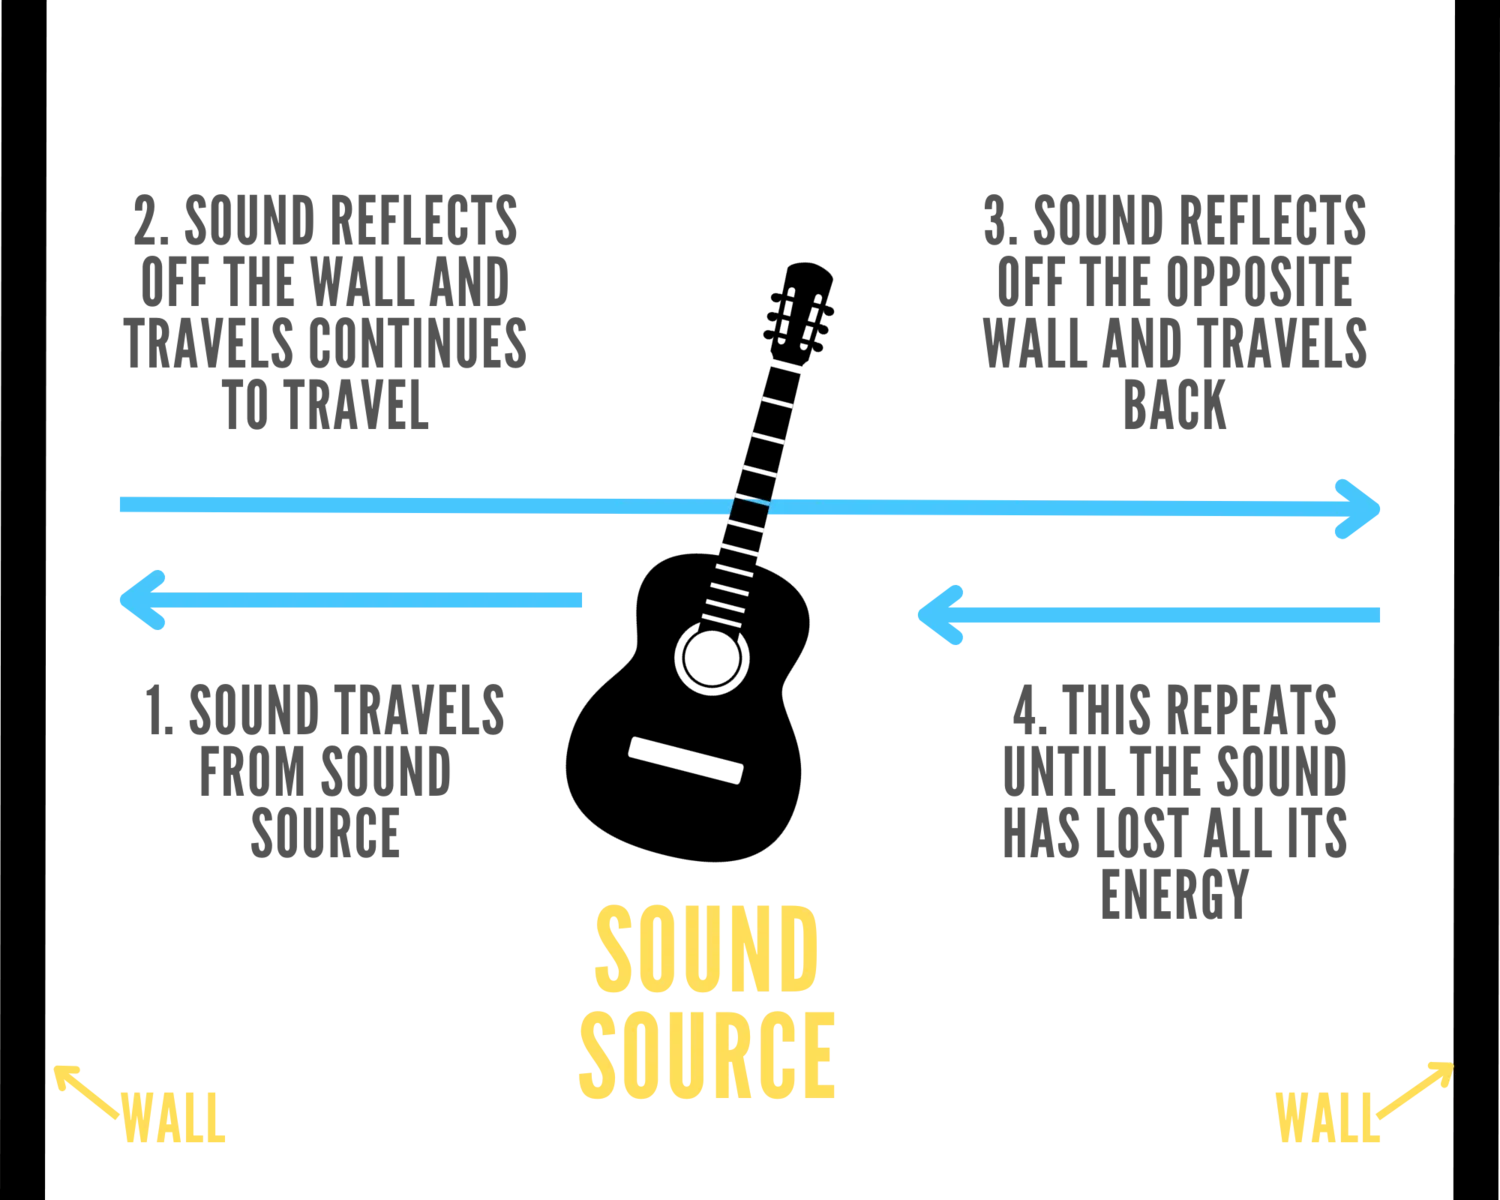 An image showing how sound from a sound source will reflect off the walls within the room and travel until all of the sounds energy is lost.